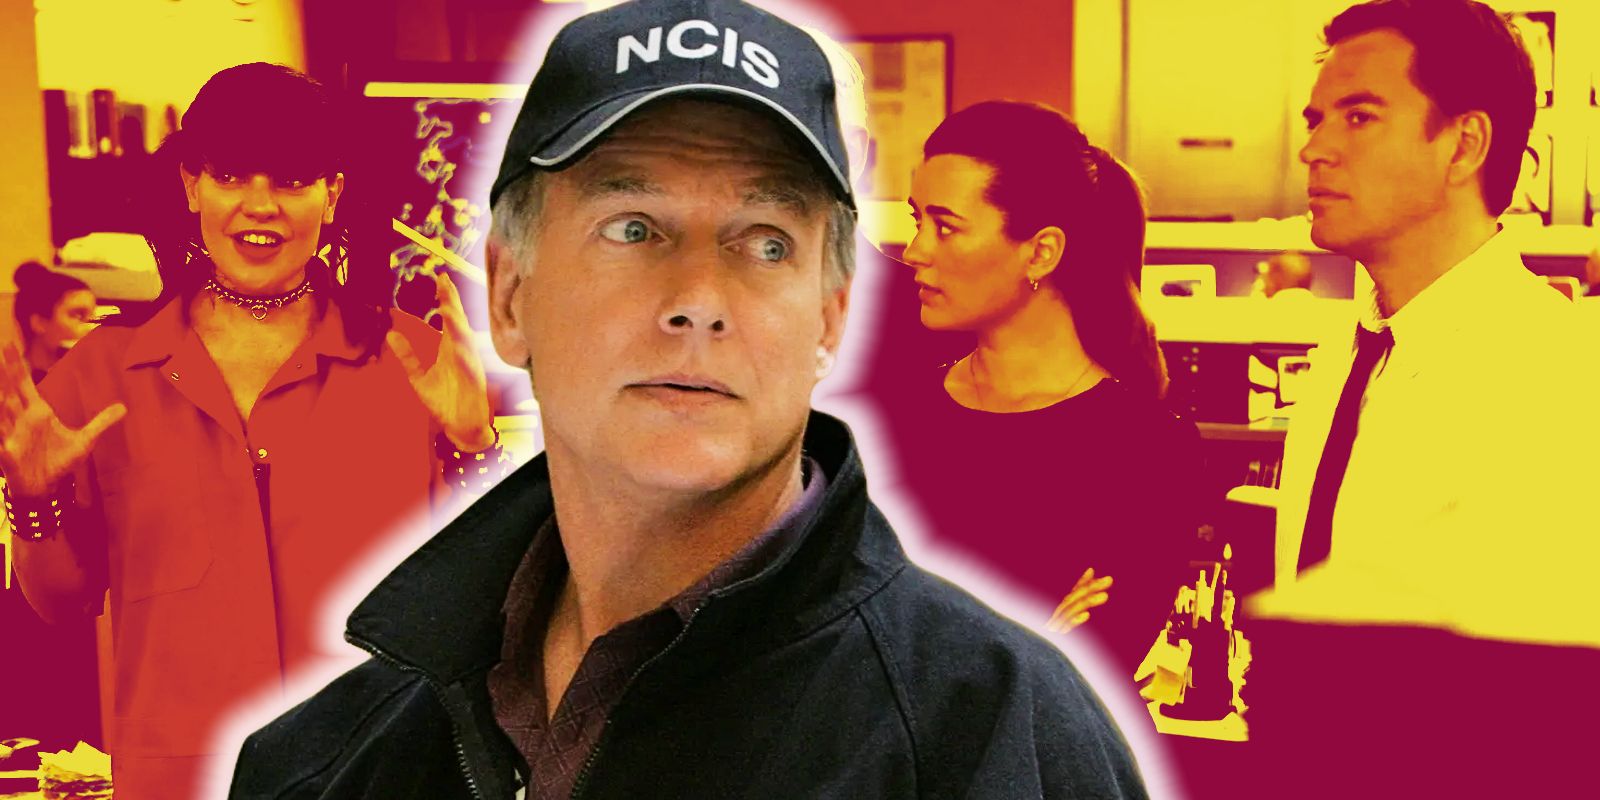 This custom image shows Ziva, Abby, and DiNozzo from NCIS with a yellow and pink overlay with Gibbs in the front.